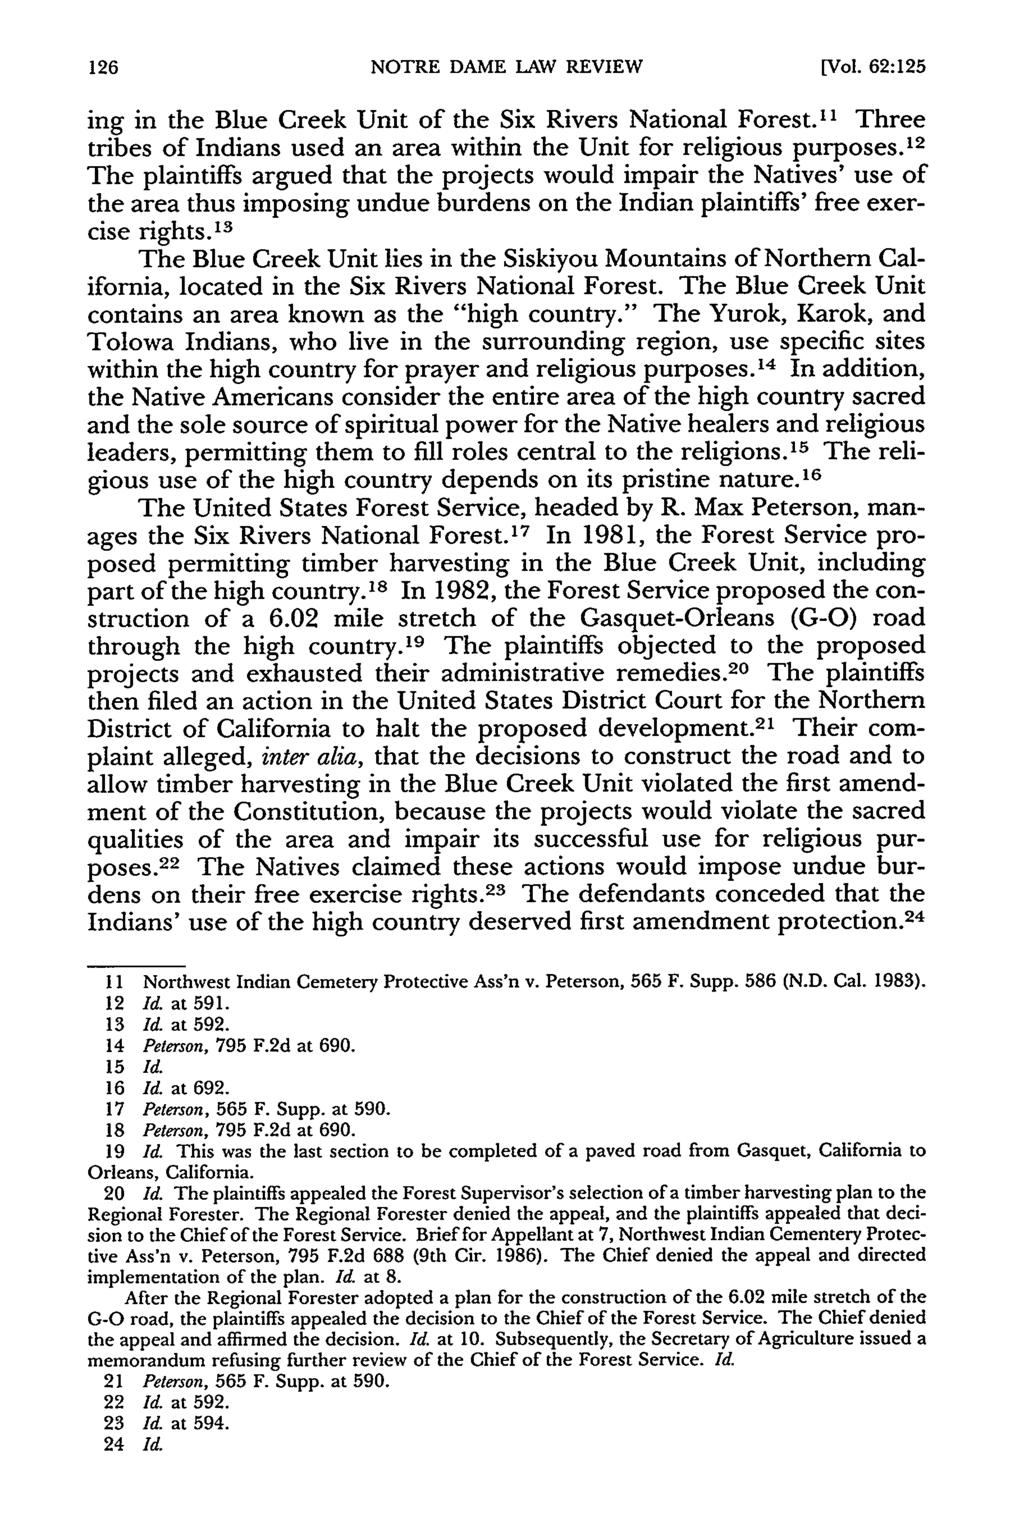 NOTRE DAME LAW REVIEW [Vol. 62:125 ing in the Blue Creek Unit of the Six Rivers National Forest." Three tribes of Indians used an area within the Unit for religious purposes.